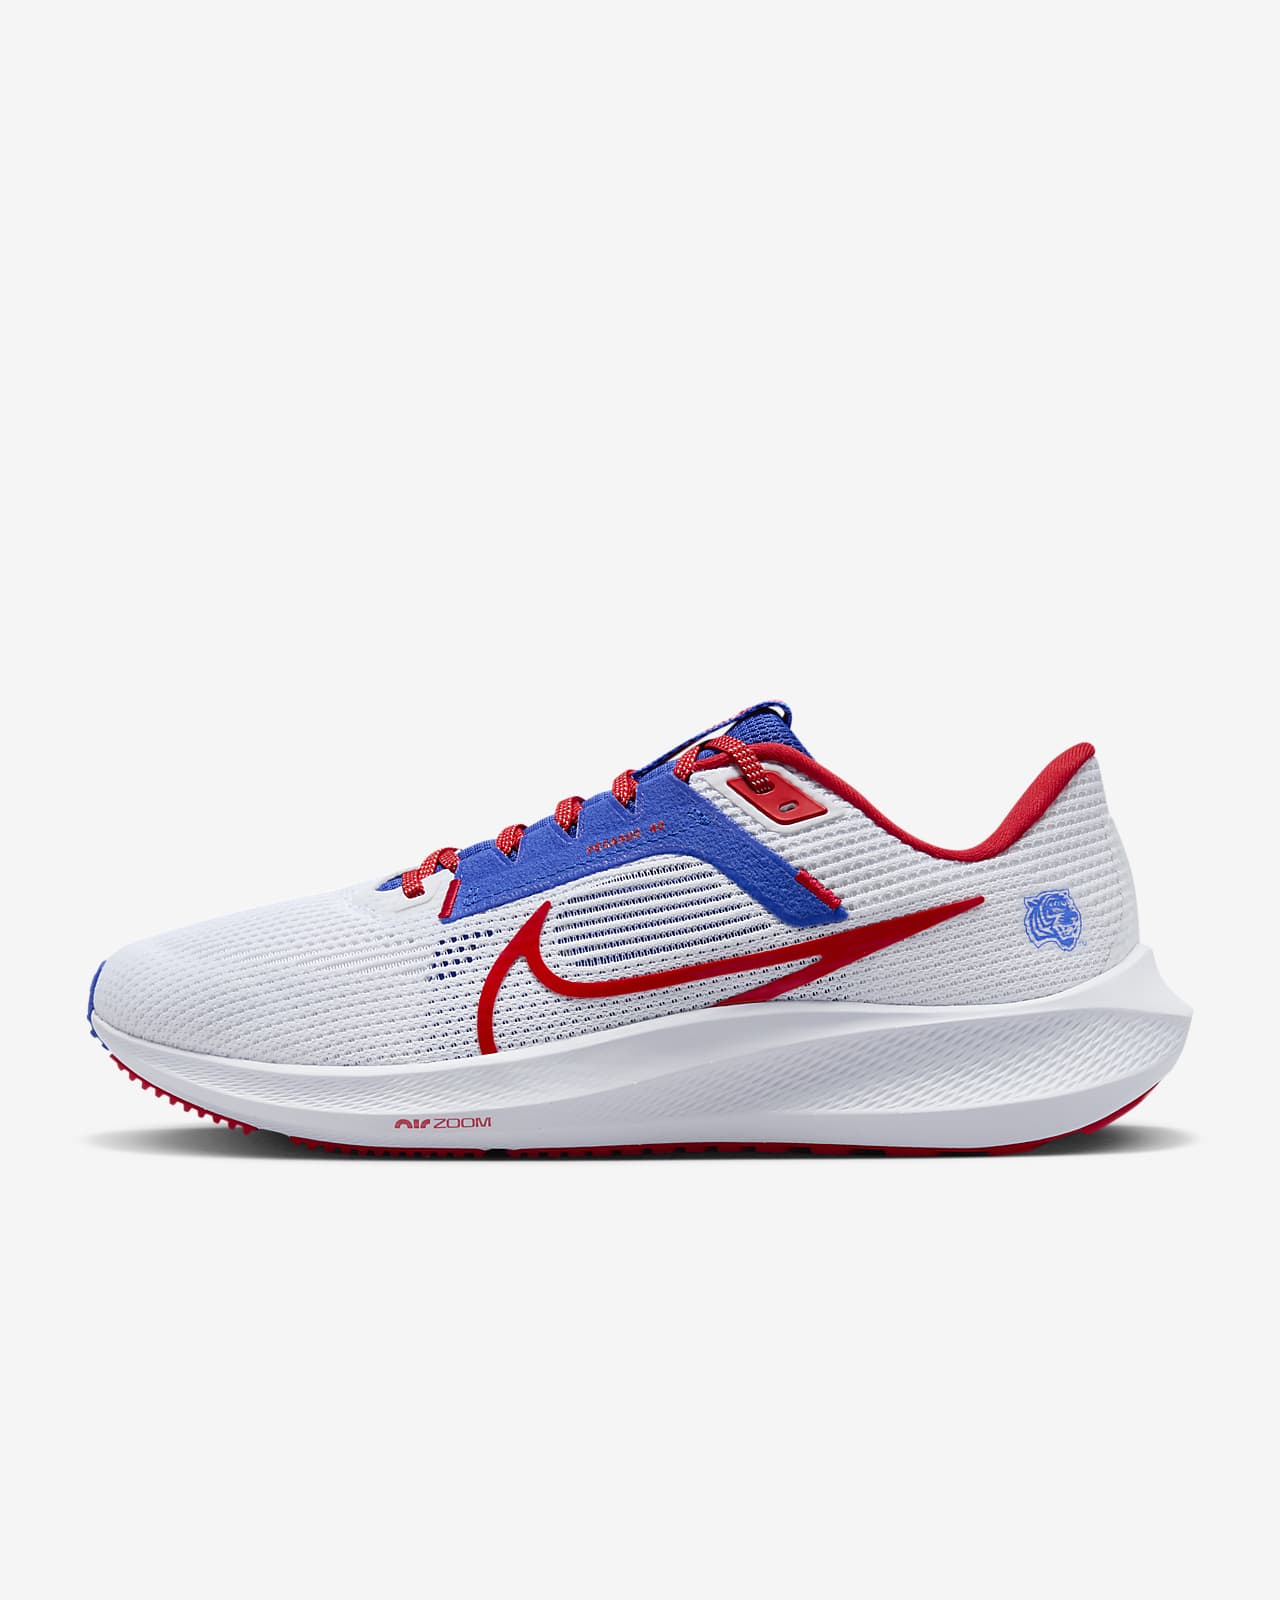 Nike Pegasus 40 (Tennessee State) Men's Road Running Shoes